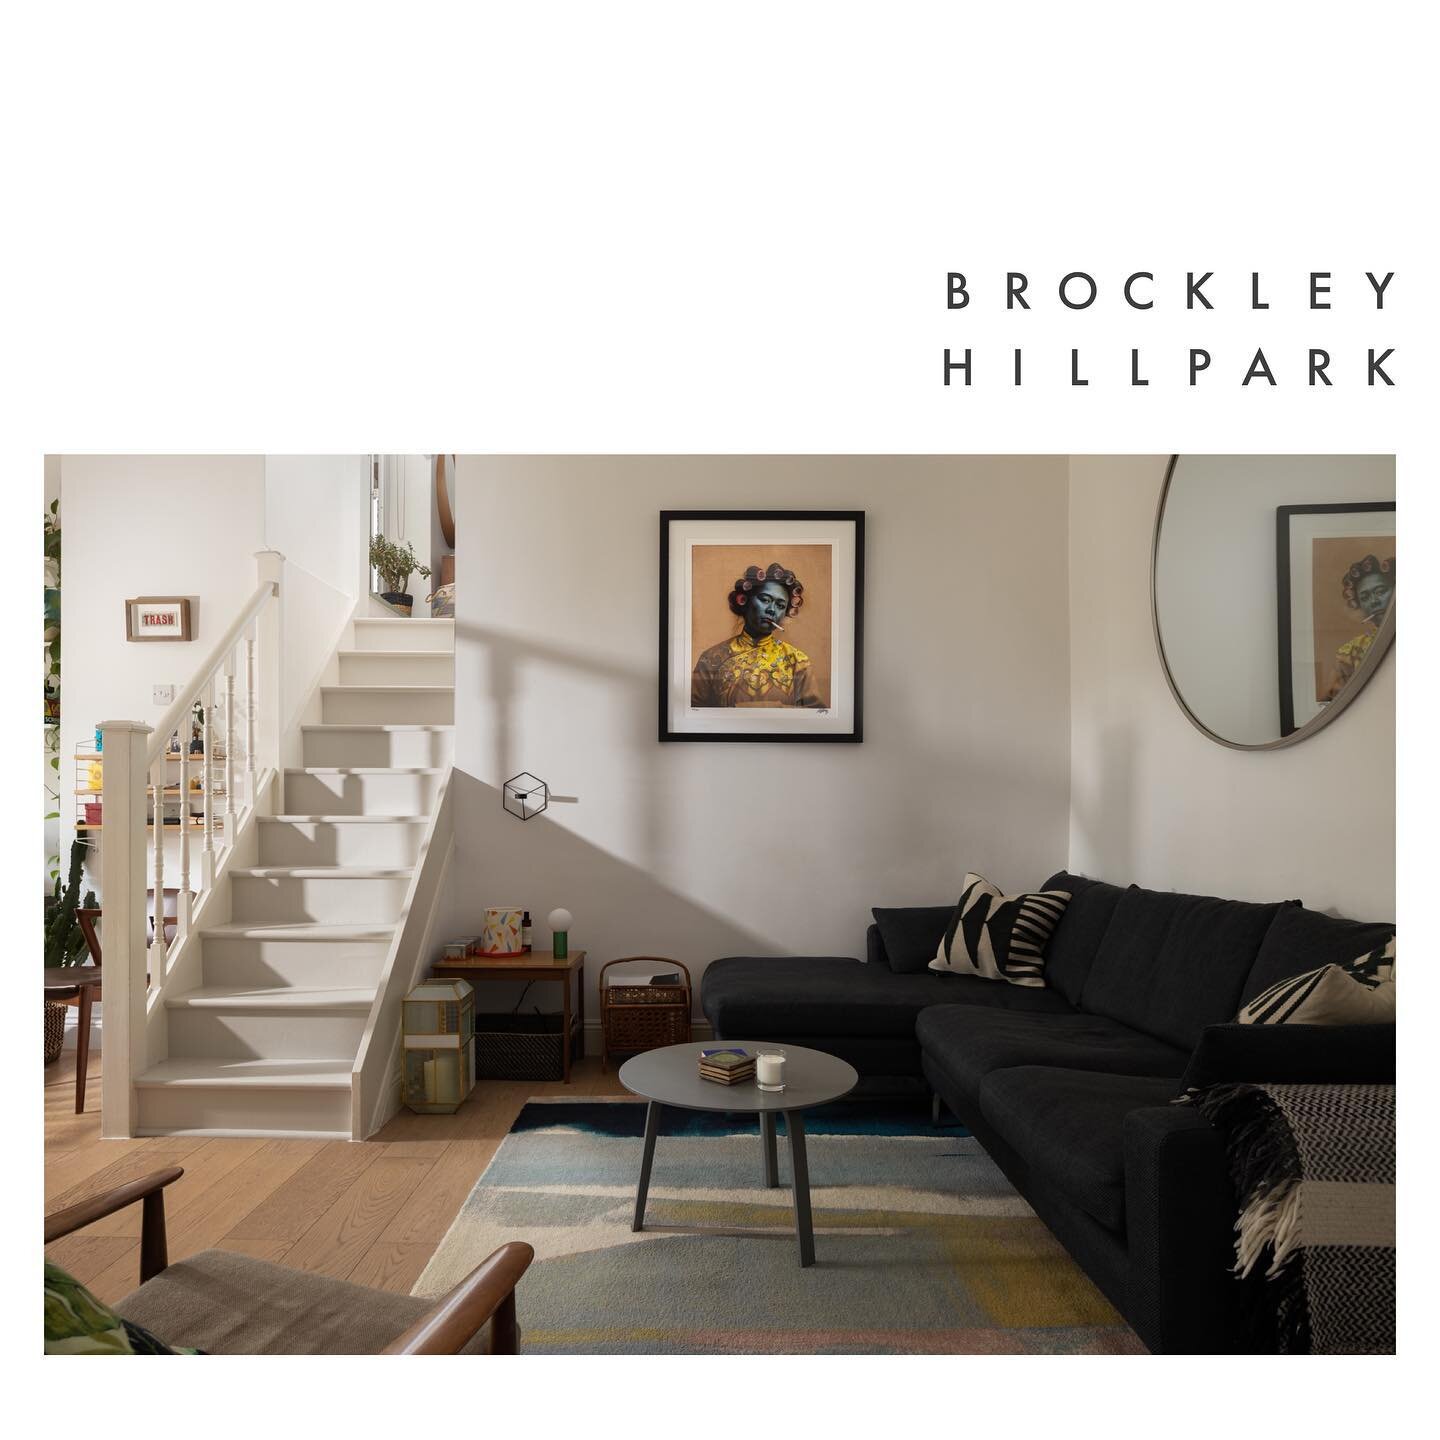 【Brockley Hill Park Estate - SE23】
A house being split in two, three or four without too much thought can creates dwellings that are not appealing in space or feel. In tight spaces hallways become storage and kitchens and bathrooms are fitted in what